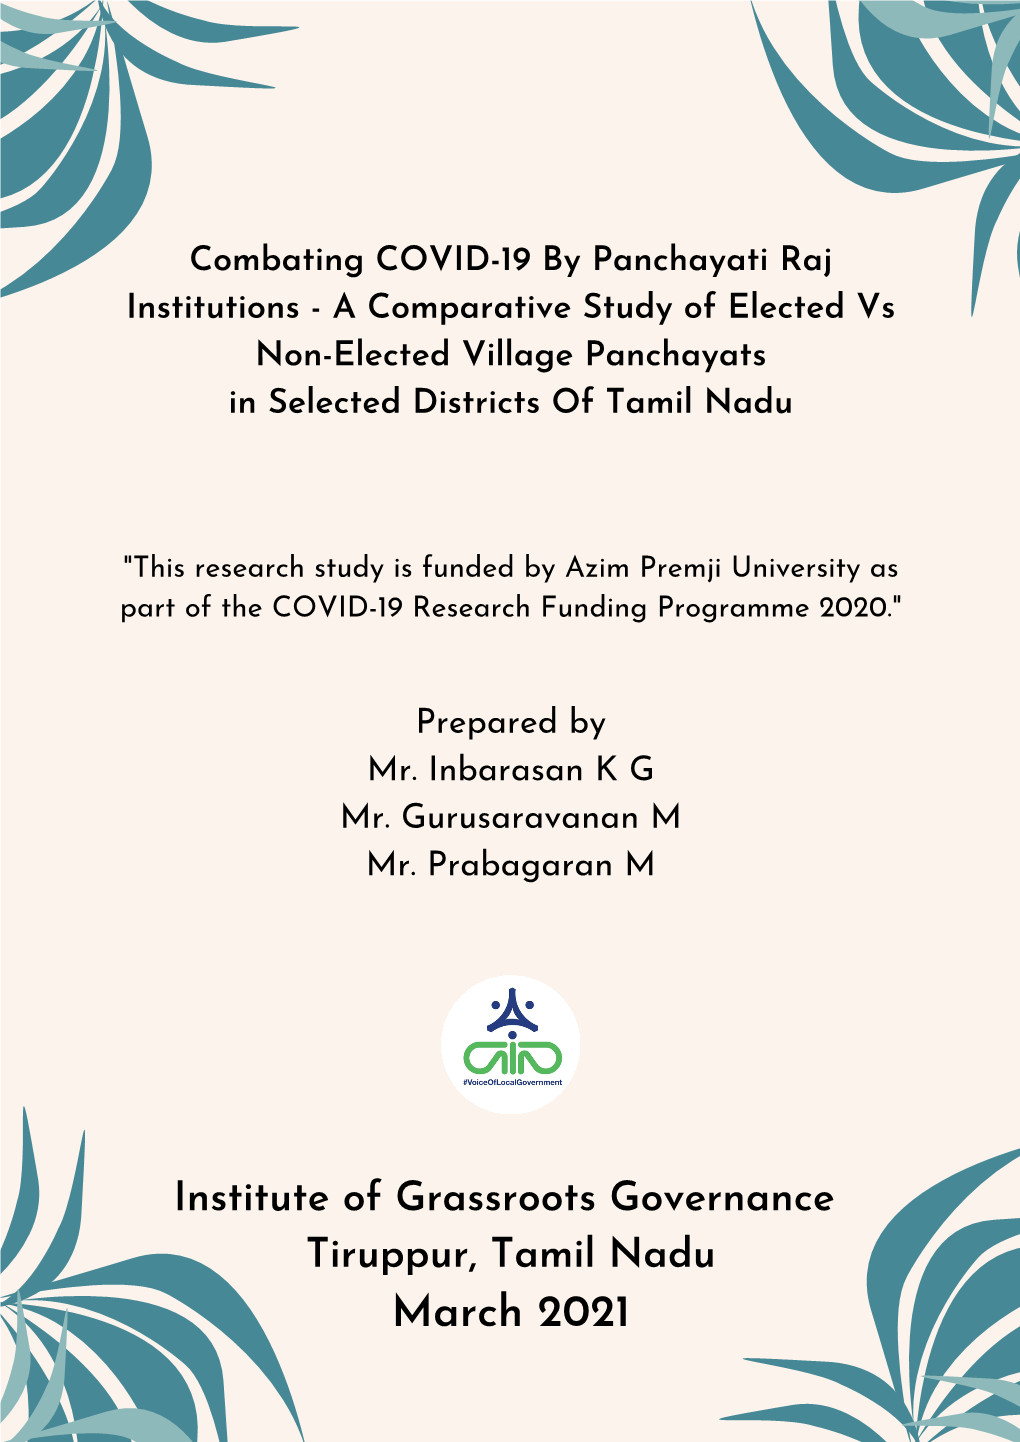 March 2021 Combating COVID-19 by Panchayati Raj Institutions - a Comparative Study of Elected Vs Non-Elected Village Panchayats in Selected Districts of Tamil Nadu